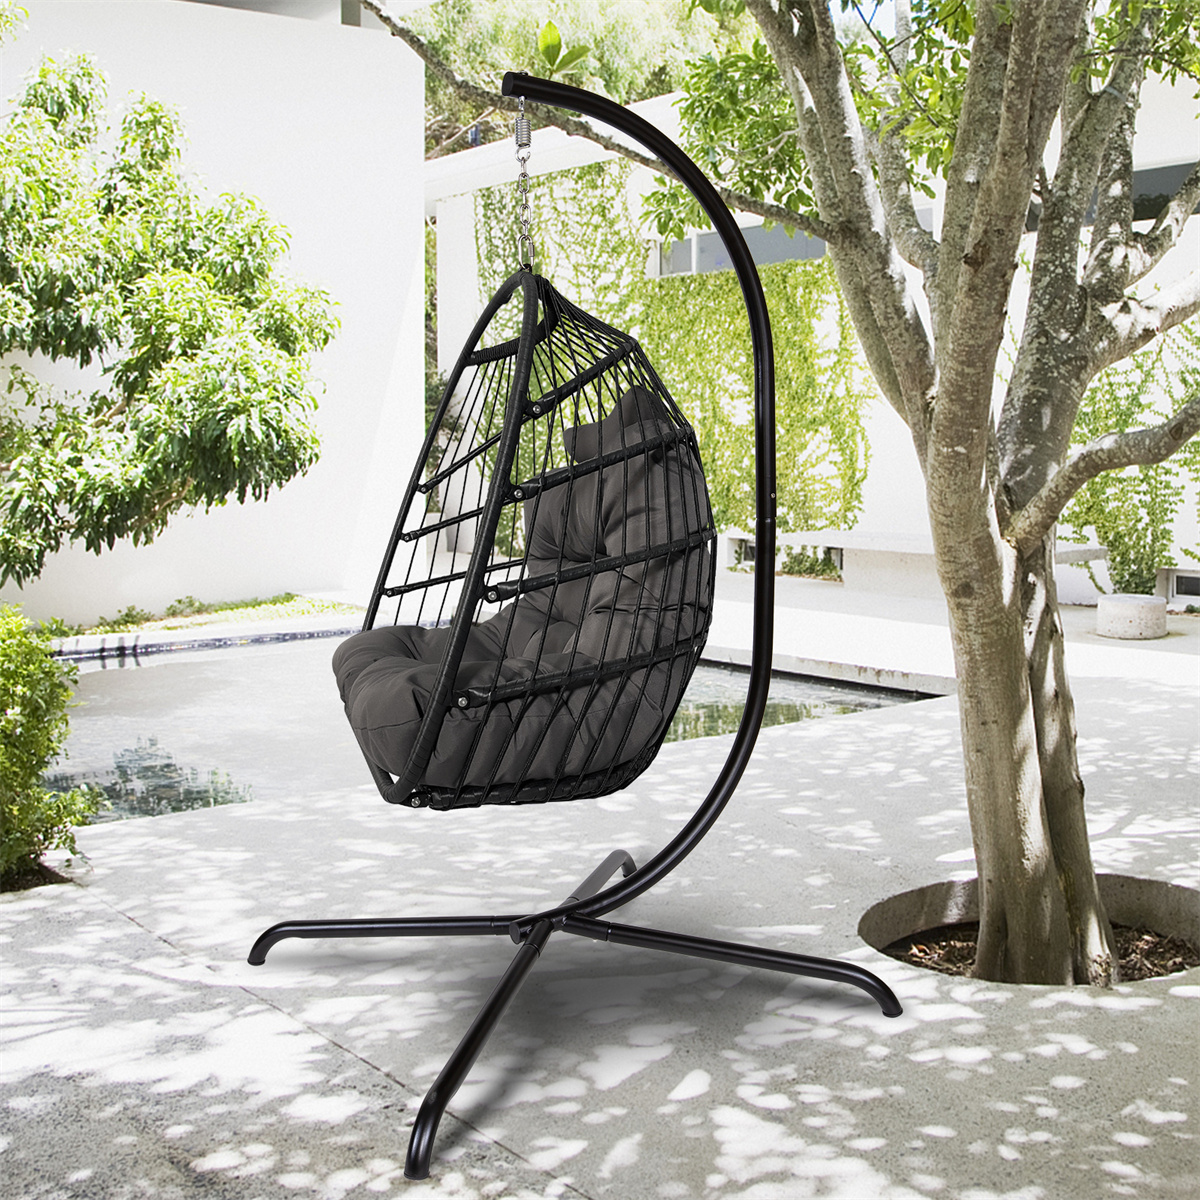 ARCTICSCORPION Black Swing Egg Chair with Stand, Indoor Outdoor Wicker Rattan Patio Basket Hanging Chair with C Type Bracket, Hammock Chair with Cushion and Pillow, Wicker Folding Hanging Chair - image 1 of 7